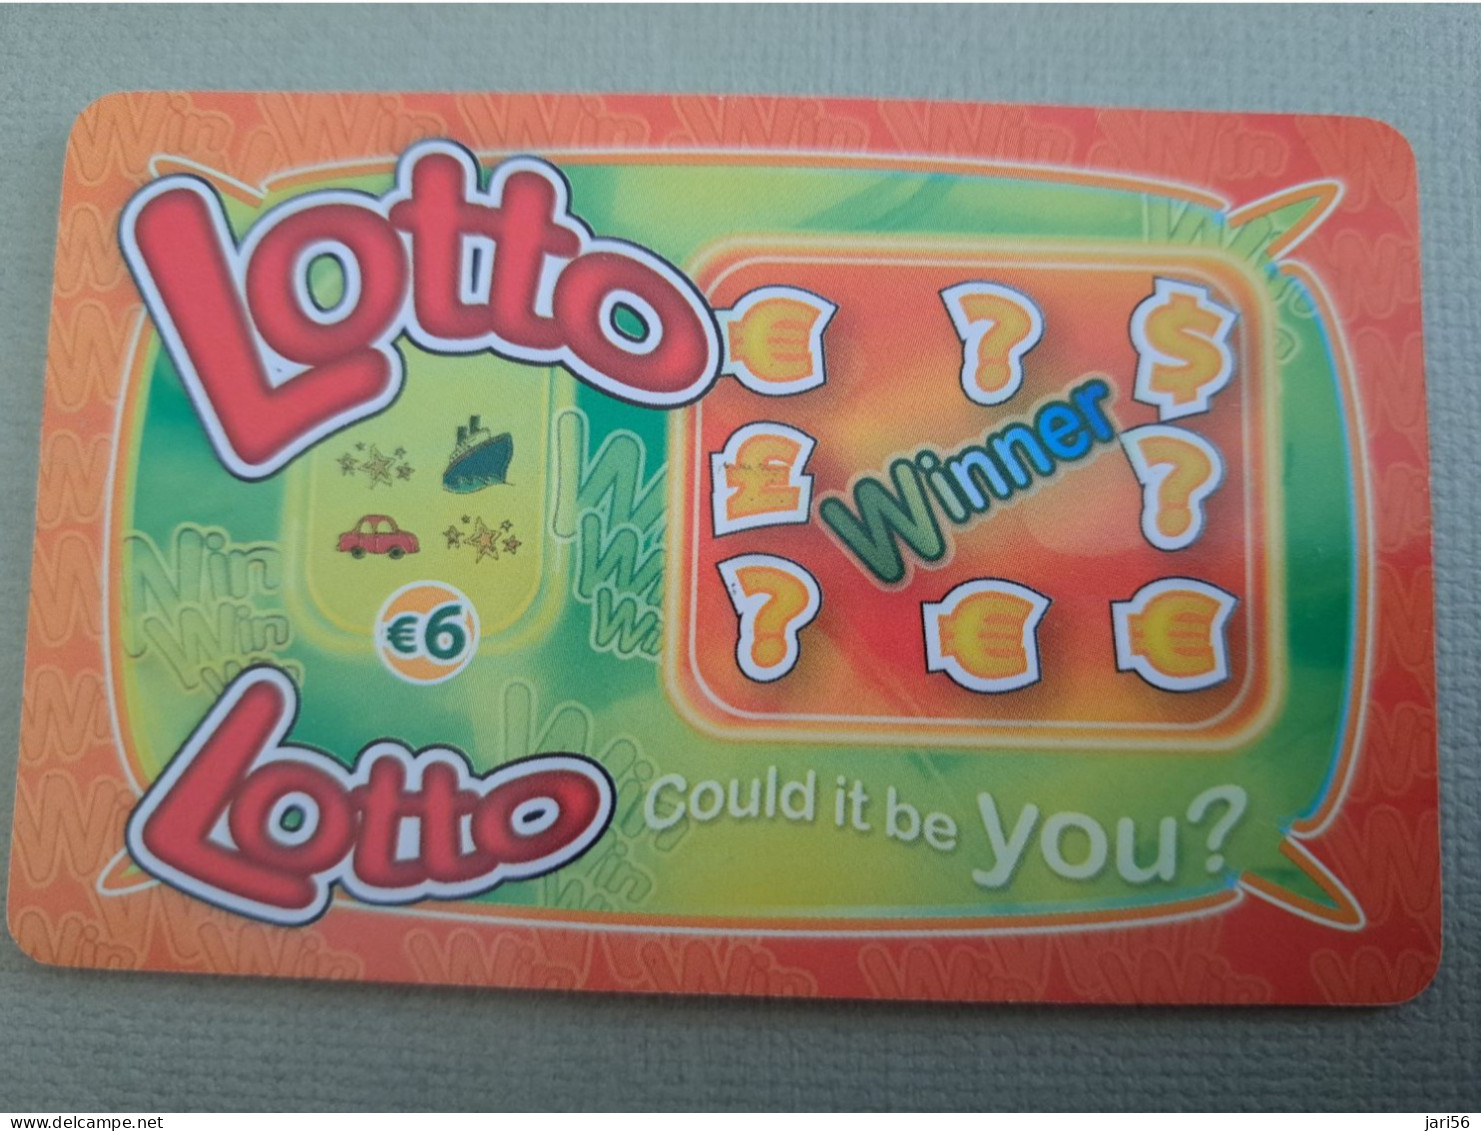 NETHERLANDS /  PREPAID / LOTTO/ COULD IT BE YOU/ WINNER?/ GAMBLING /  € 6,-  USED  ** 15257** - Privat